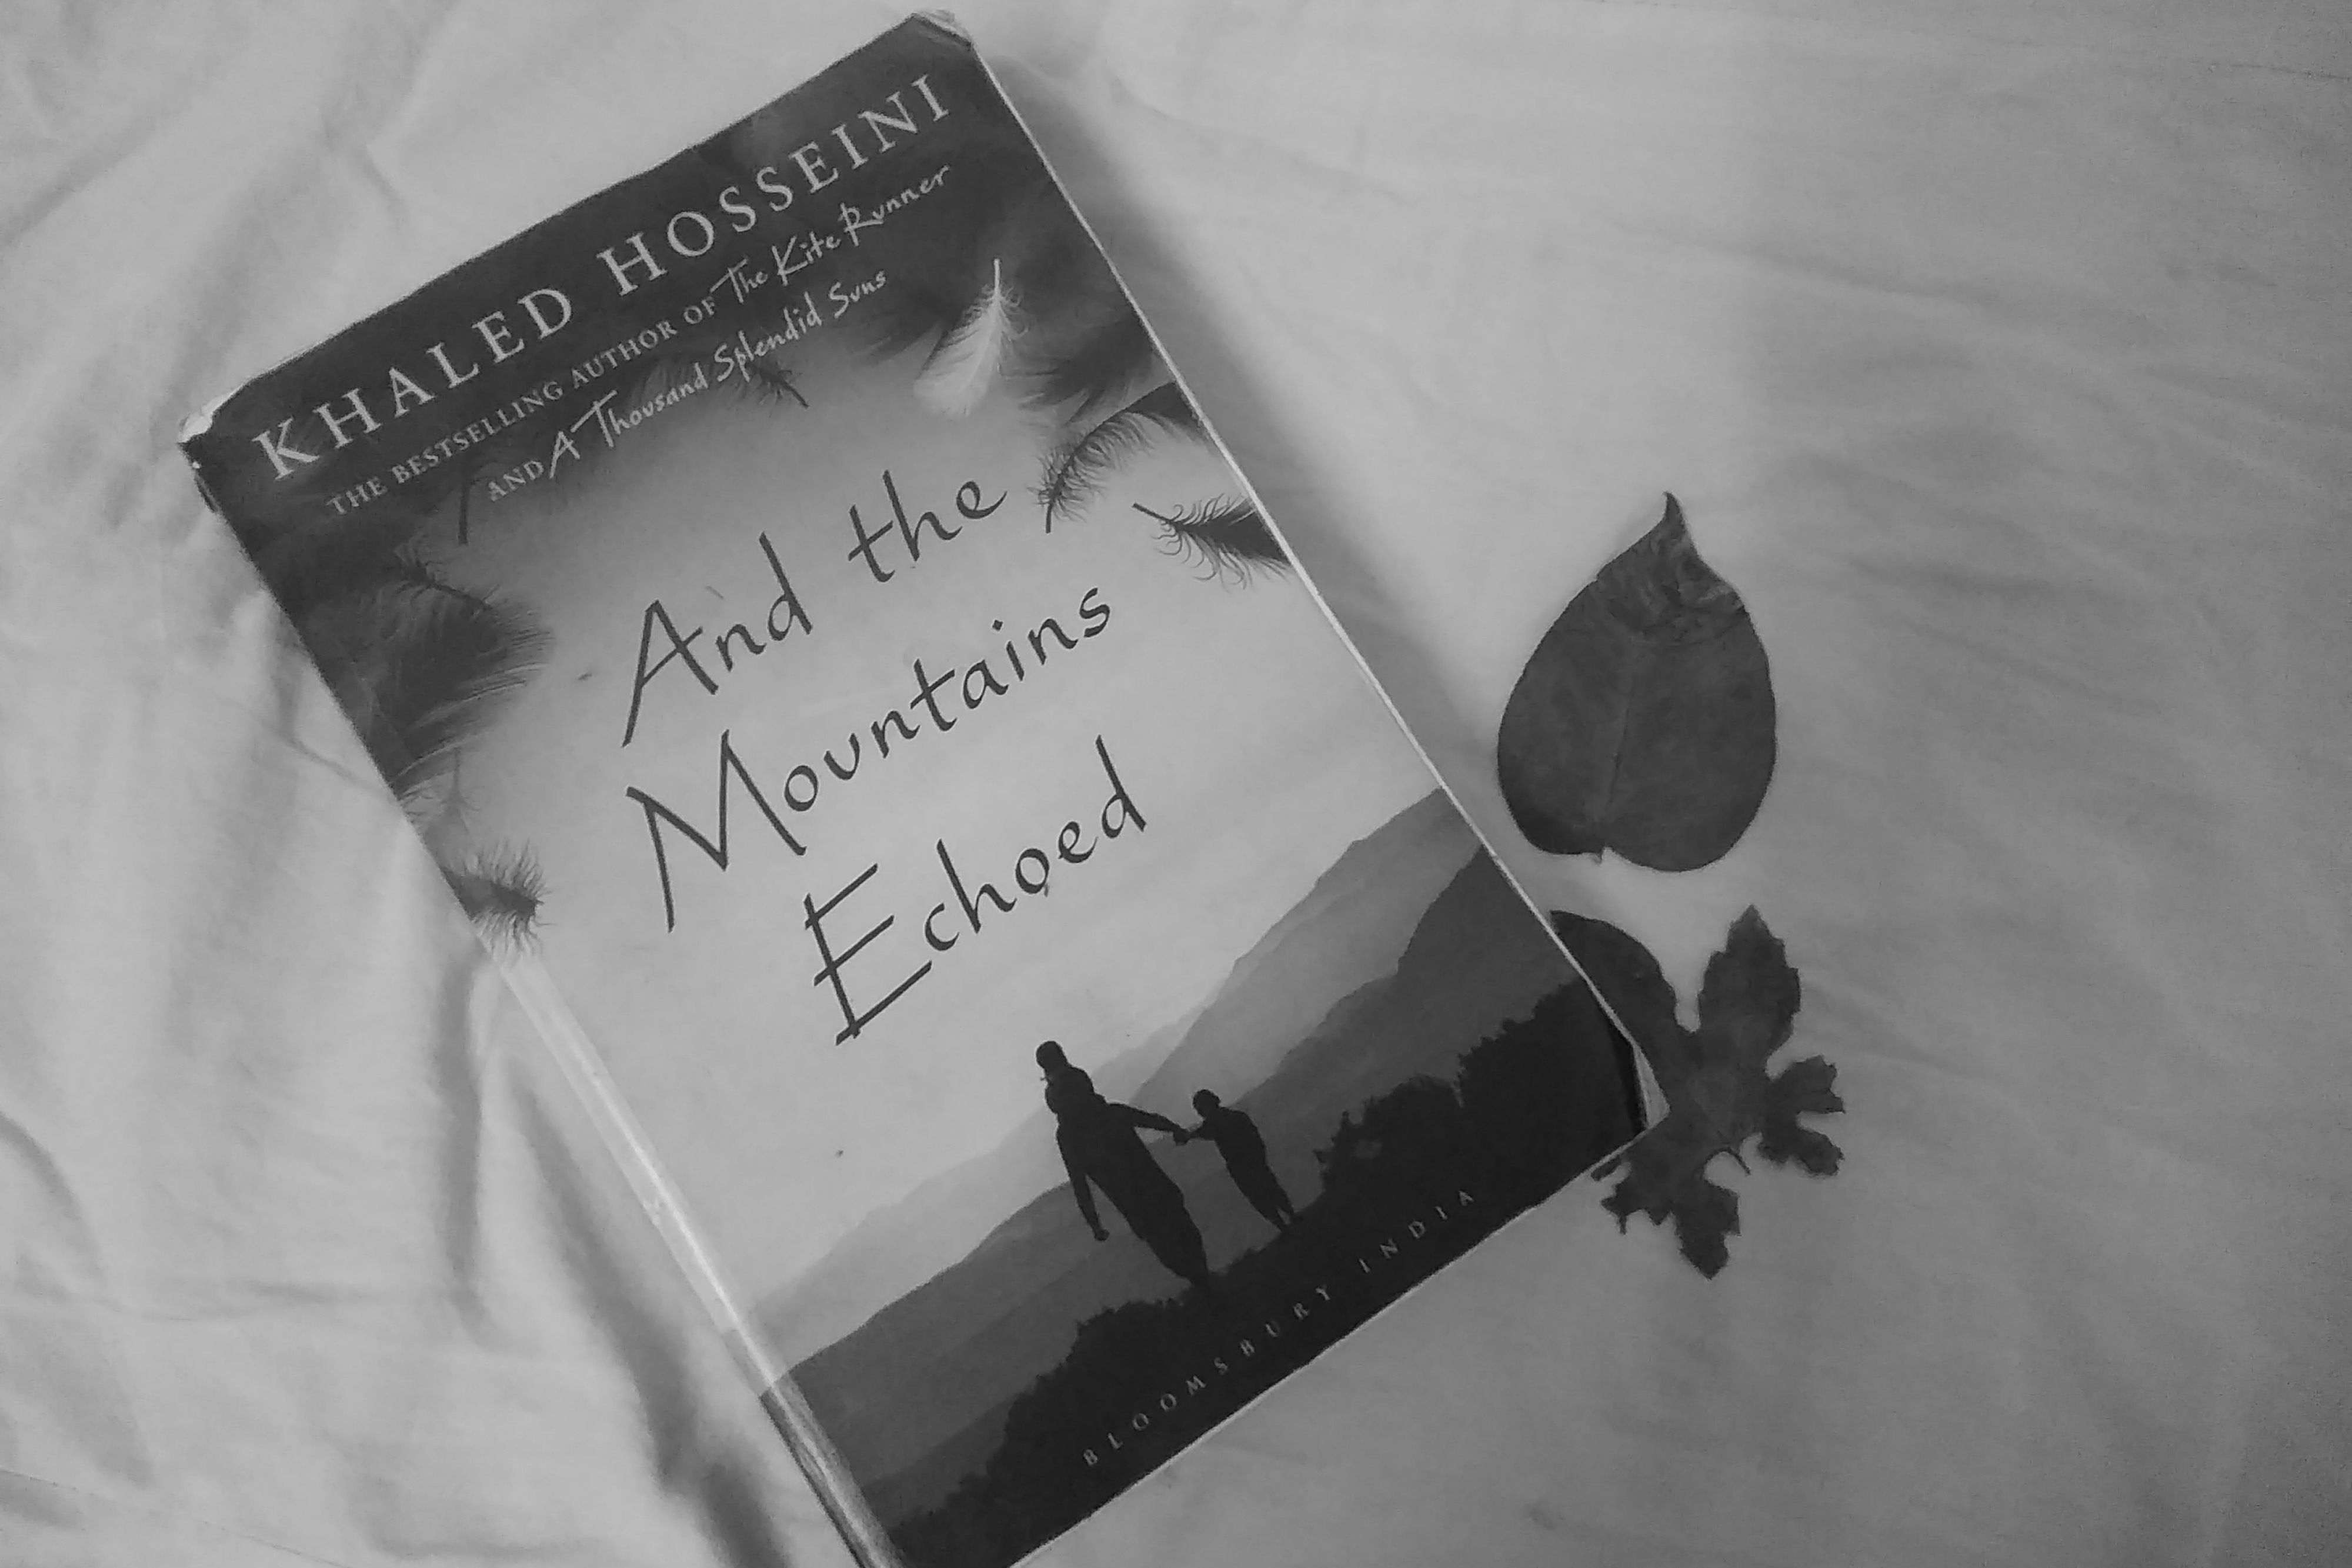 the third book of Khaled Hosseini called 'And The Mountains Echoed' placed on a table cloth amidst aesthetic looking dried leaves